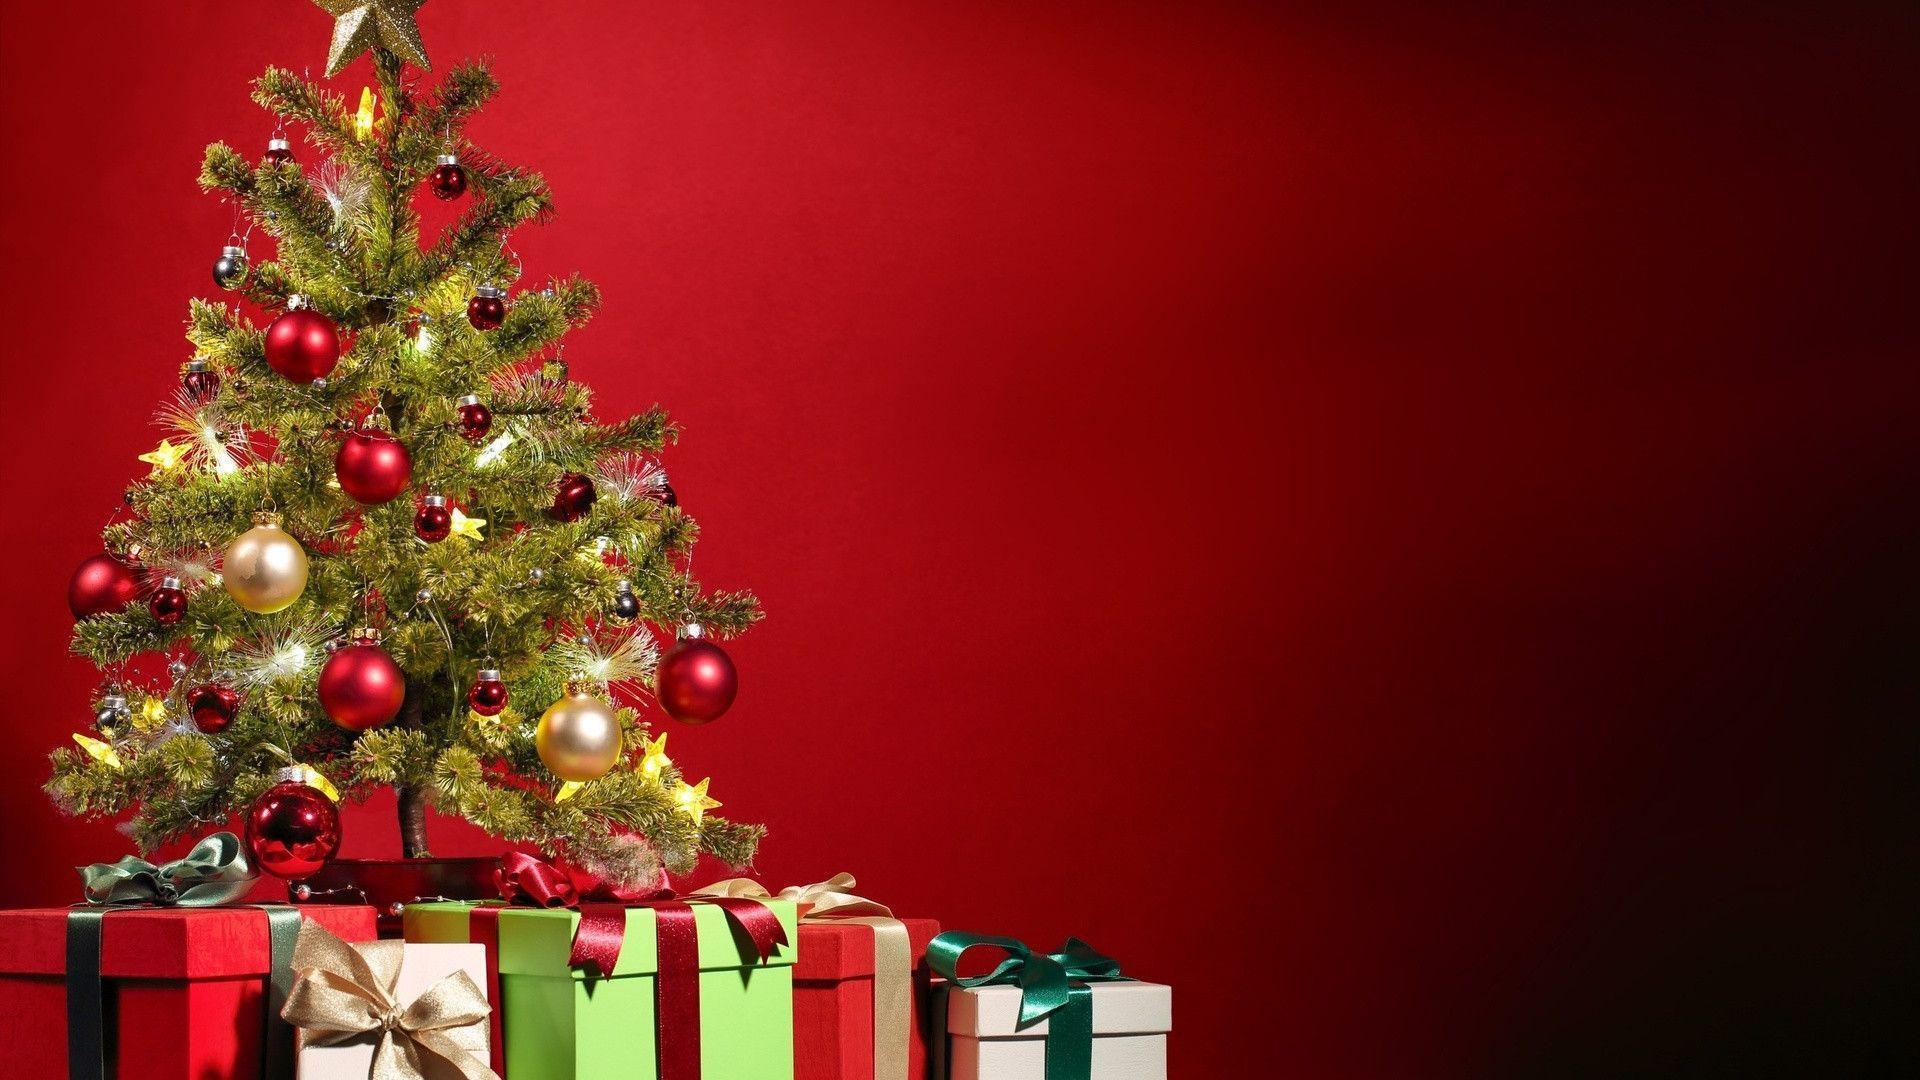 Christmas Tree With Presents Free Wallpaper